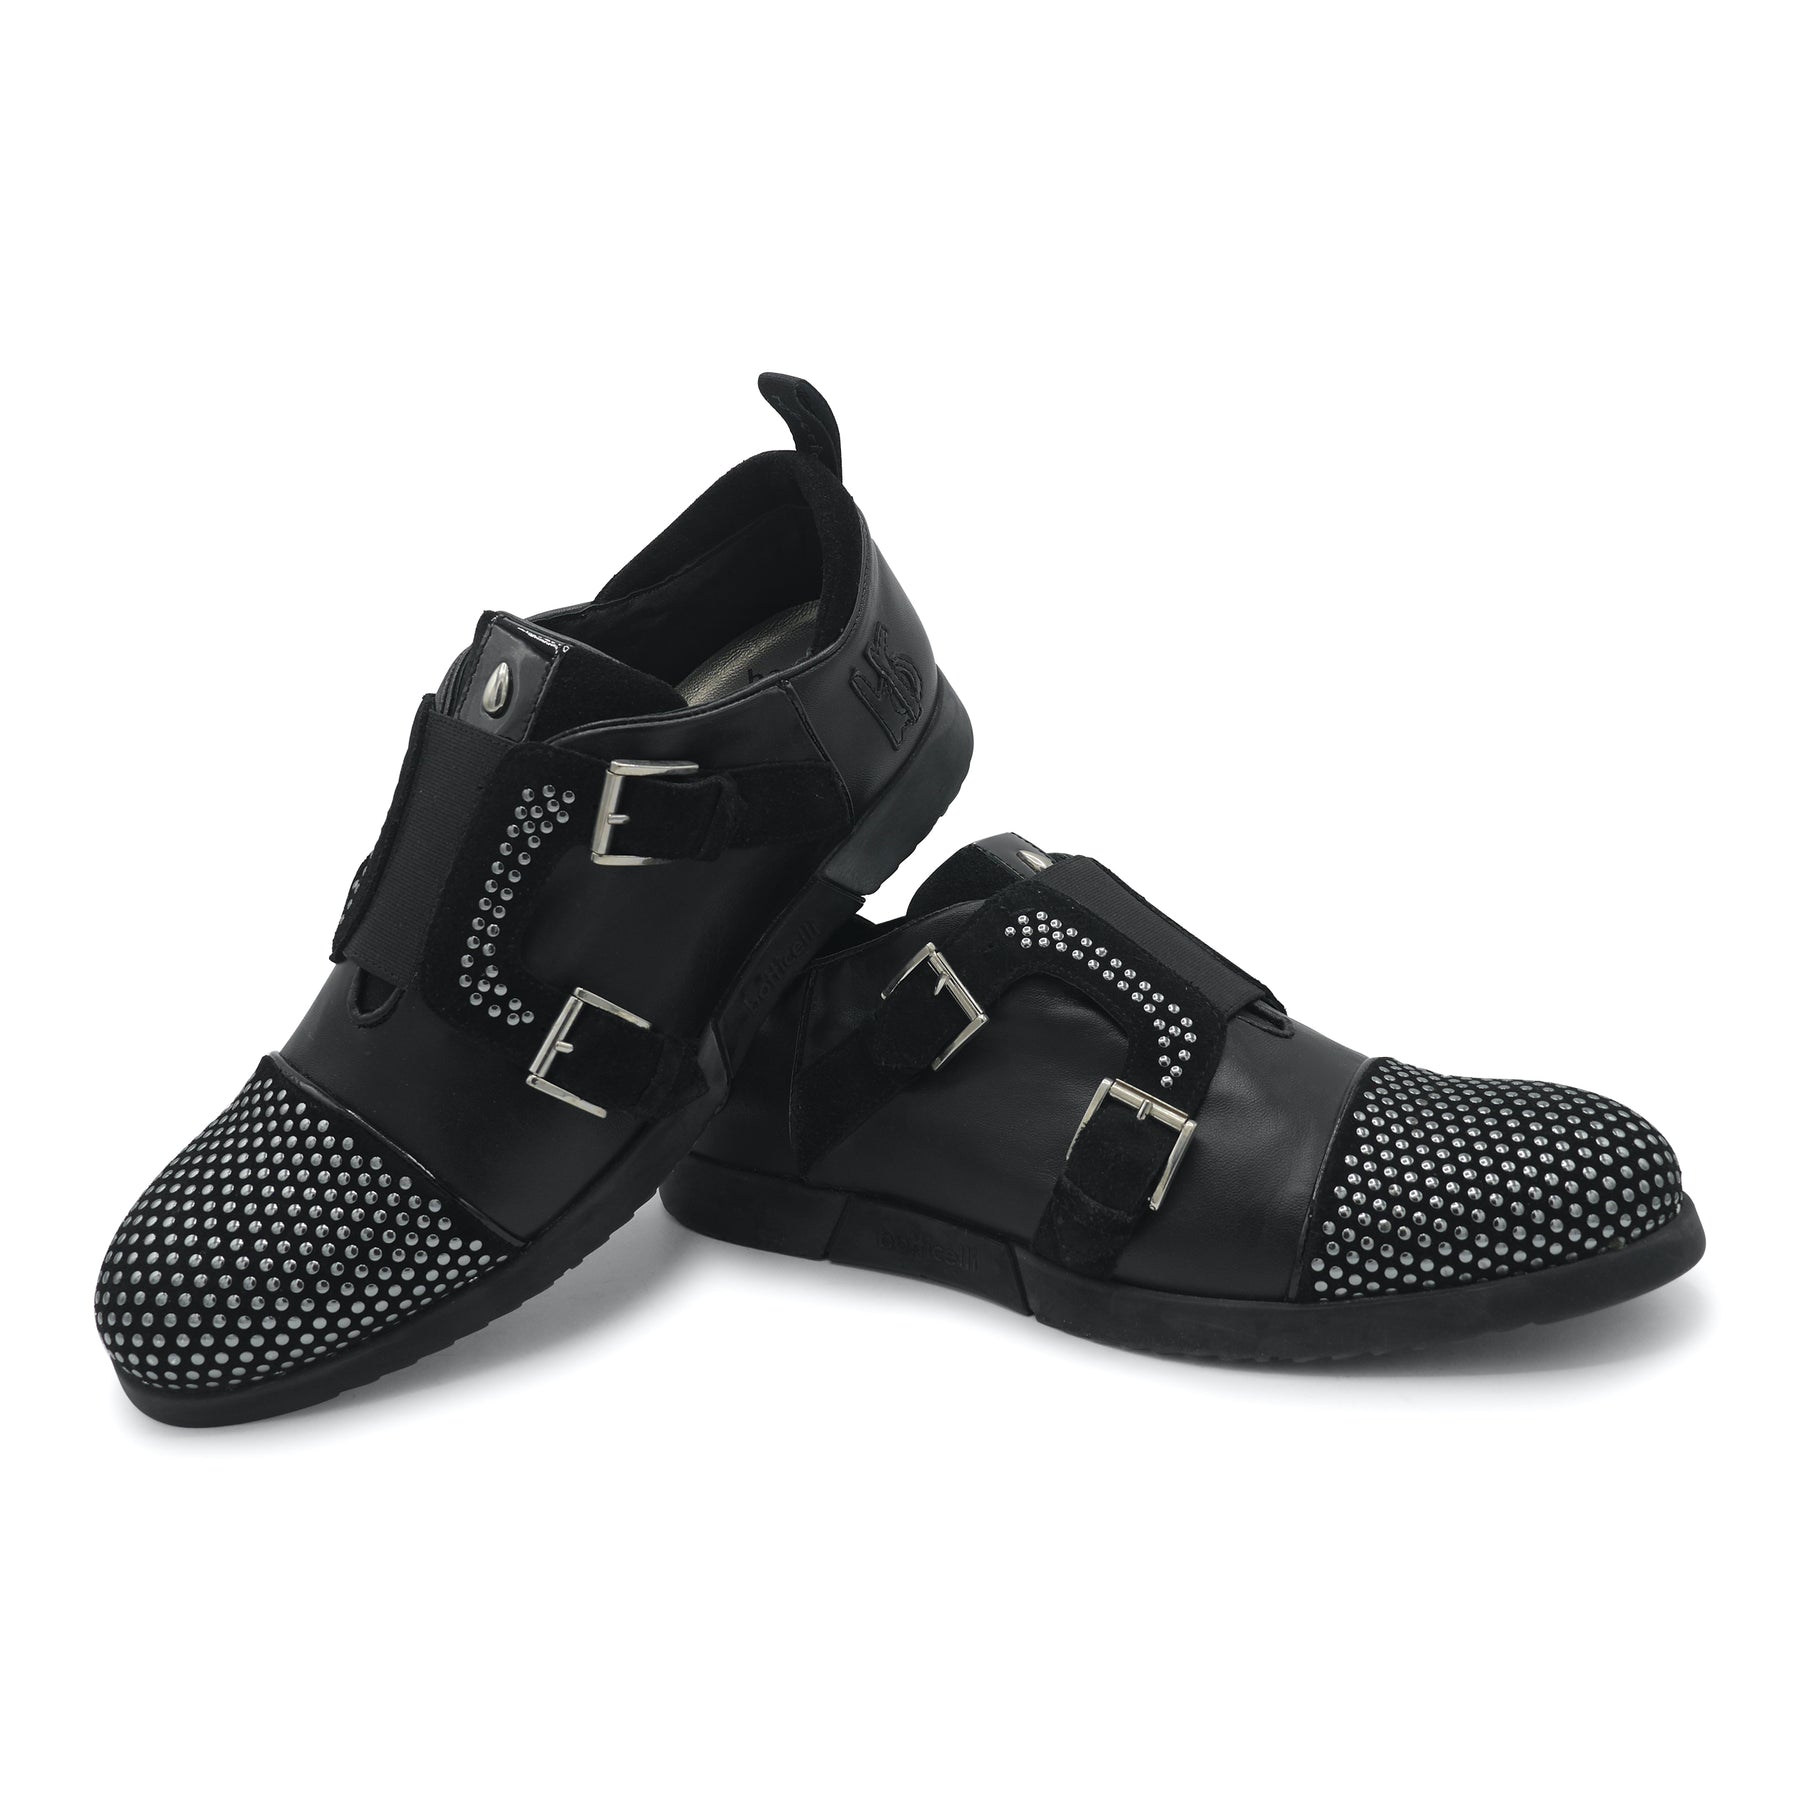 LU25121- Black Studded Double Monk Trainer